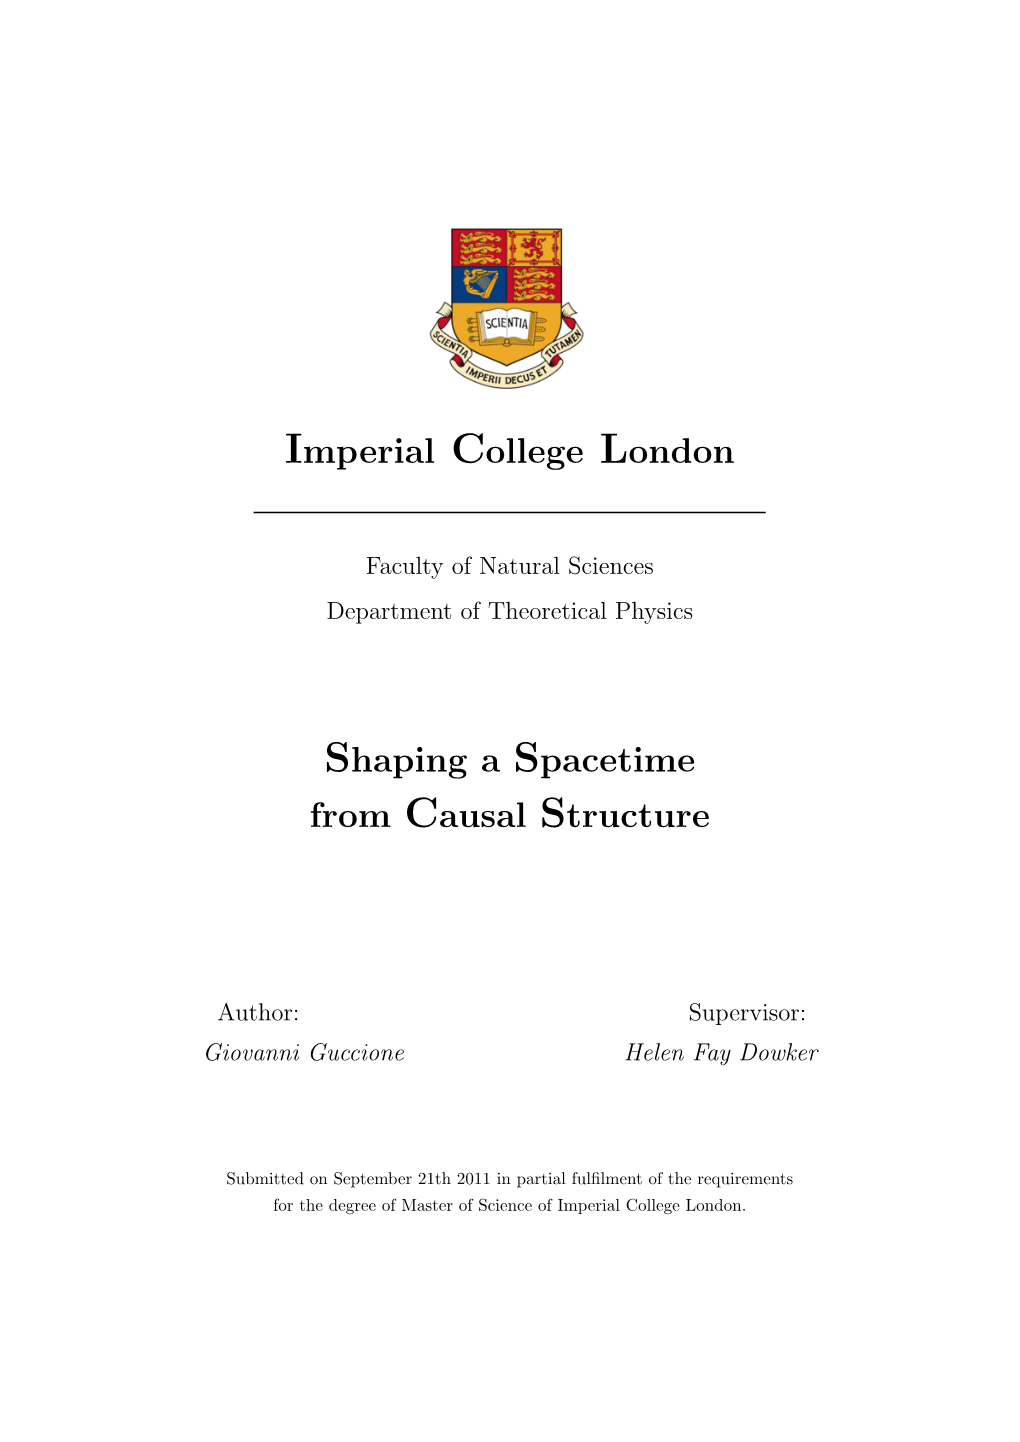 Imperial College London Shaping a Spacetime from Causal Structure